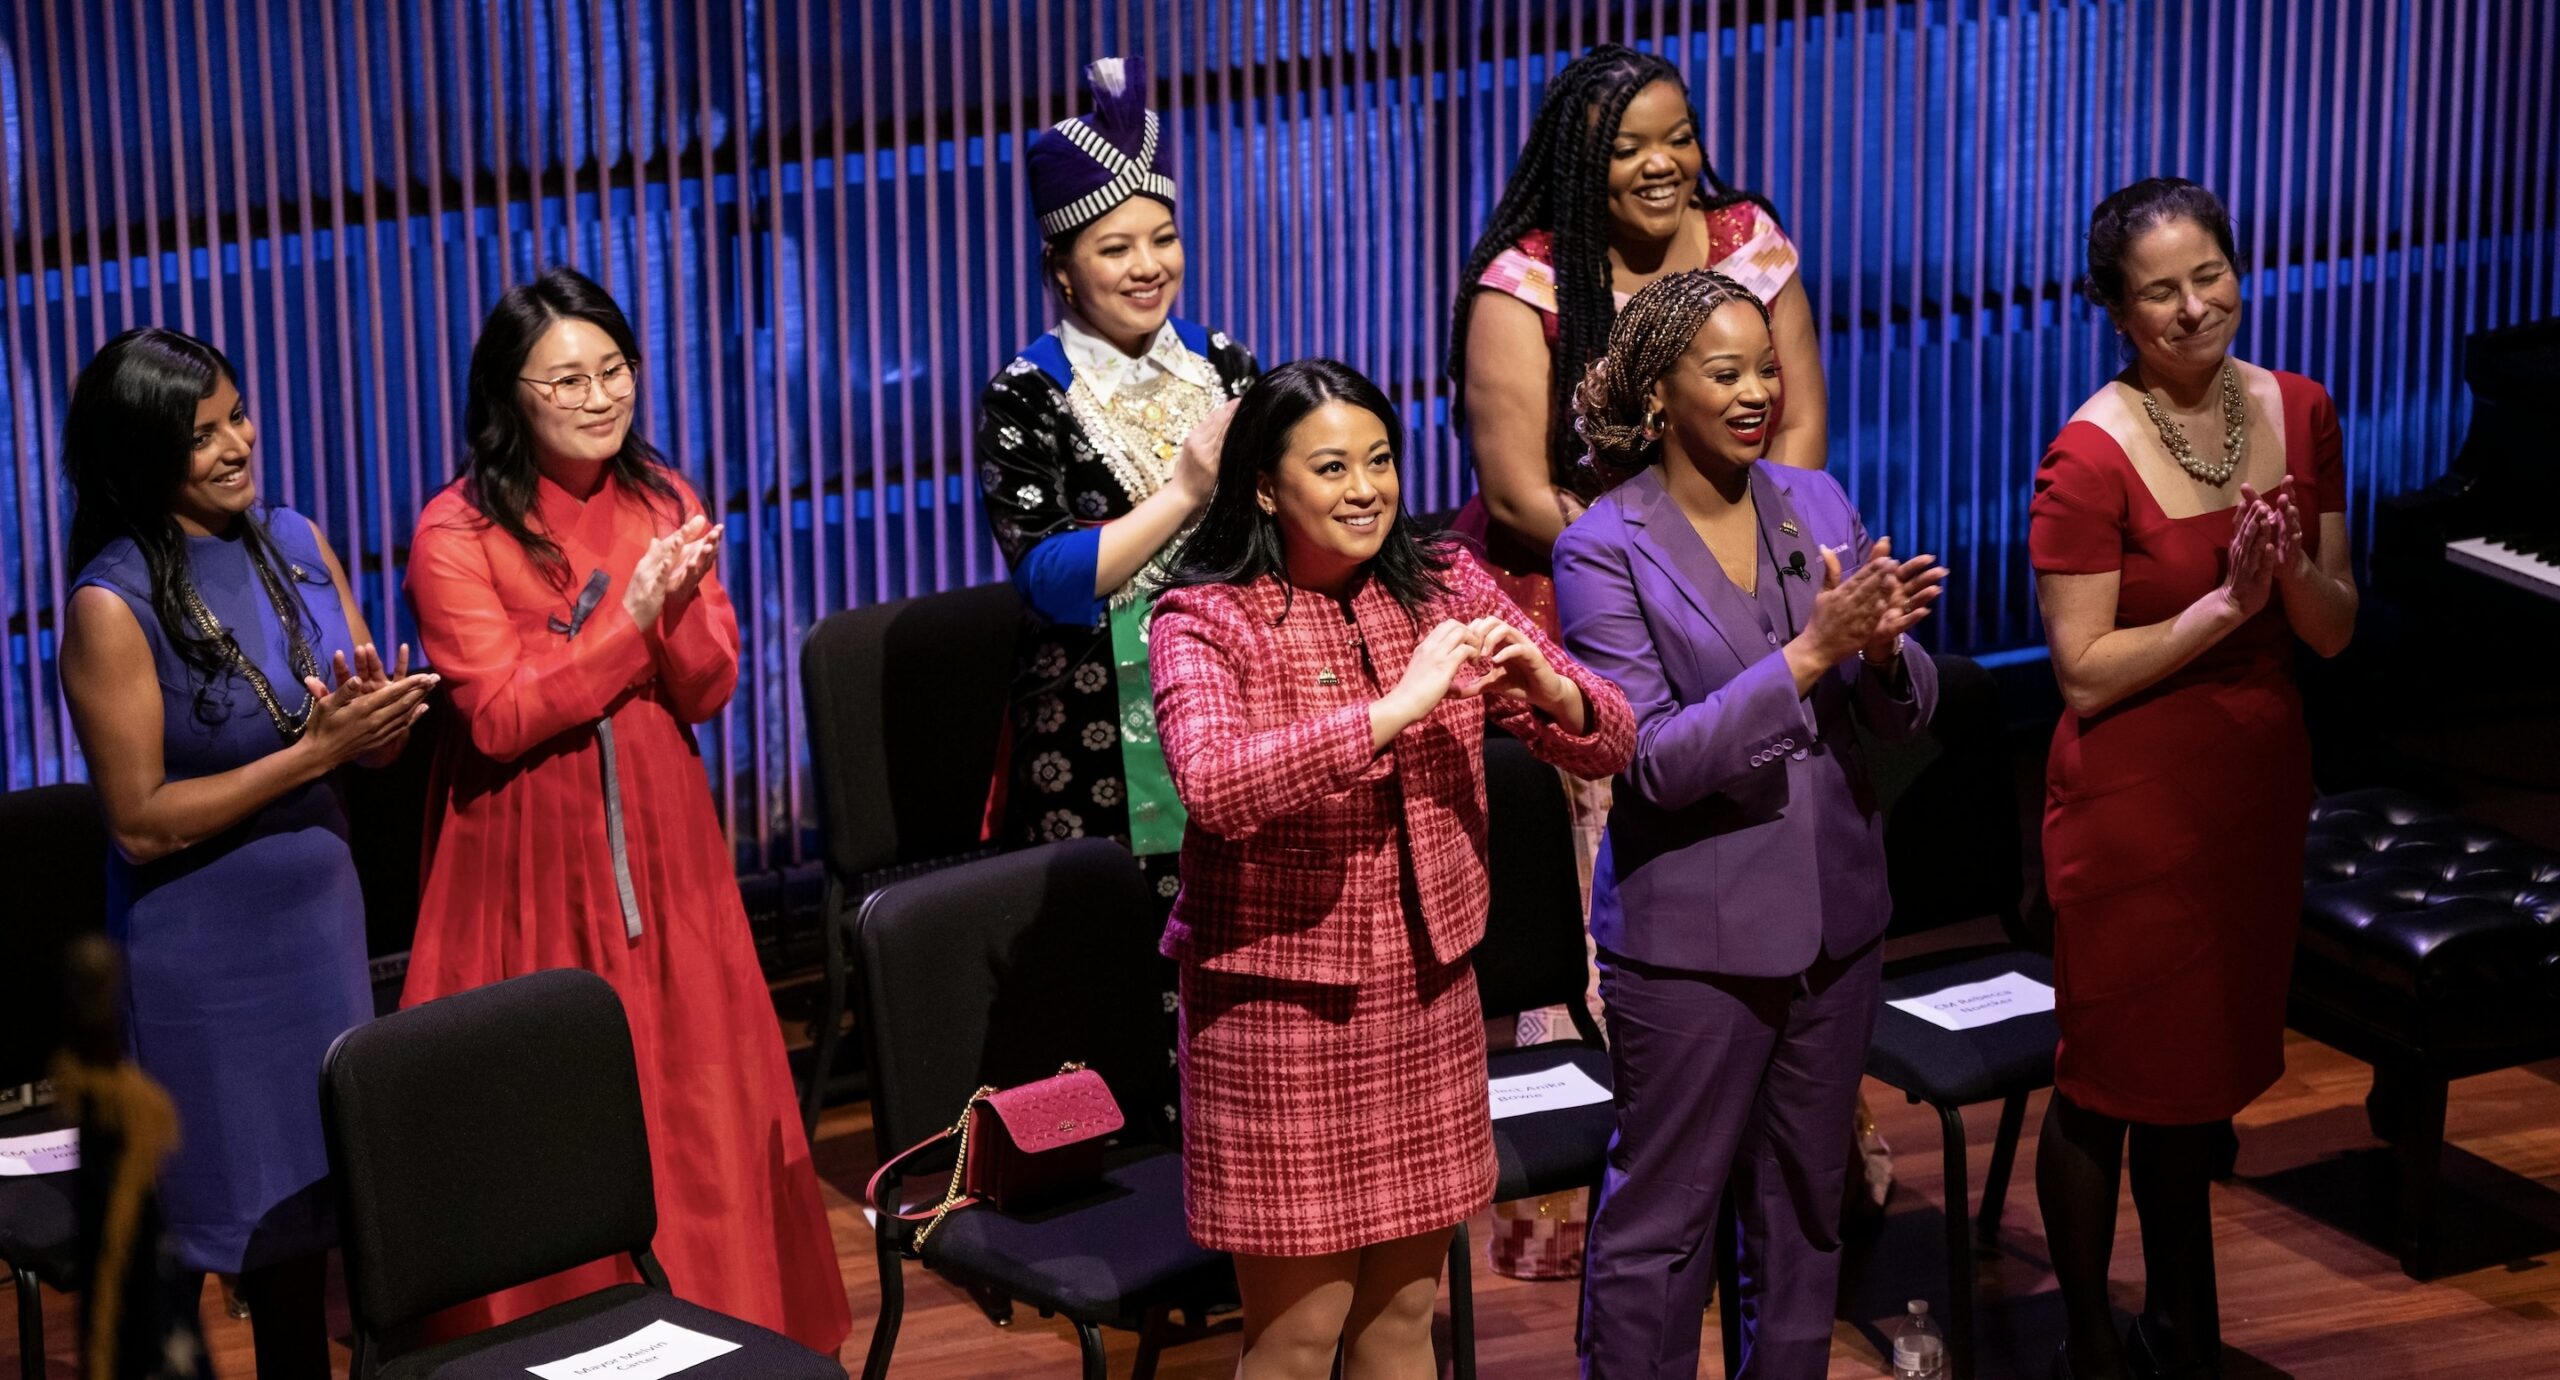 All seven female St. Paul city council members, four new to the council, were applauded after they were sworn in at a ceremony. photo credit: RENÉE JONES SCHNEIDER, STAR TRIBUNE